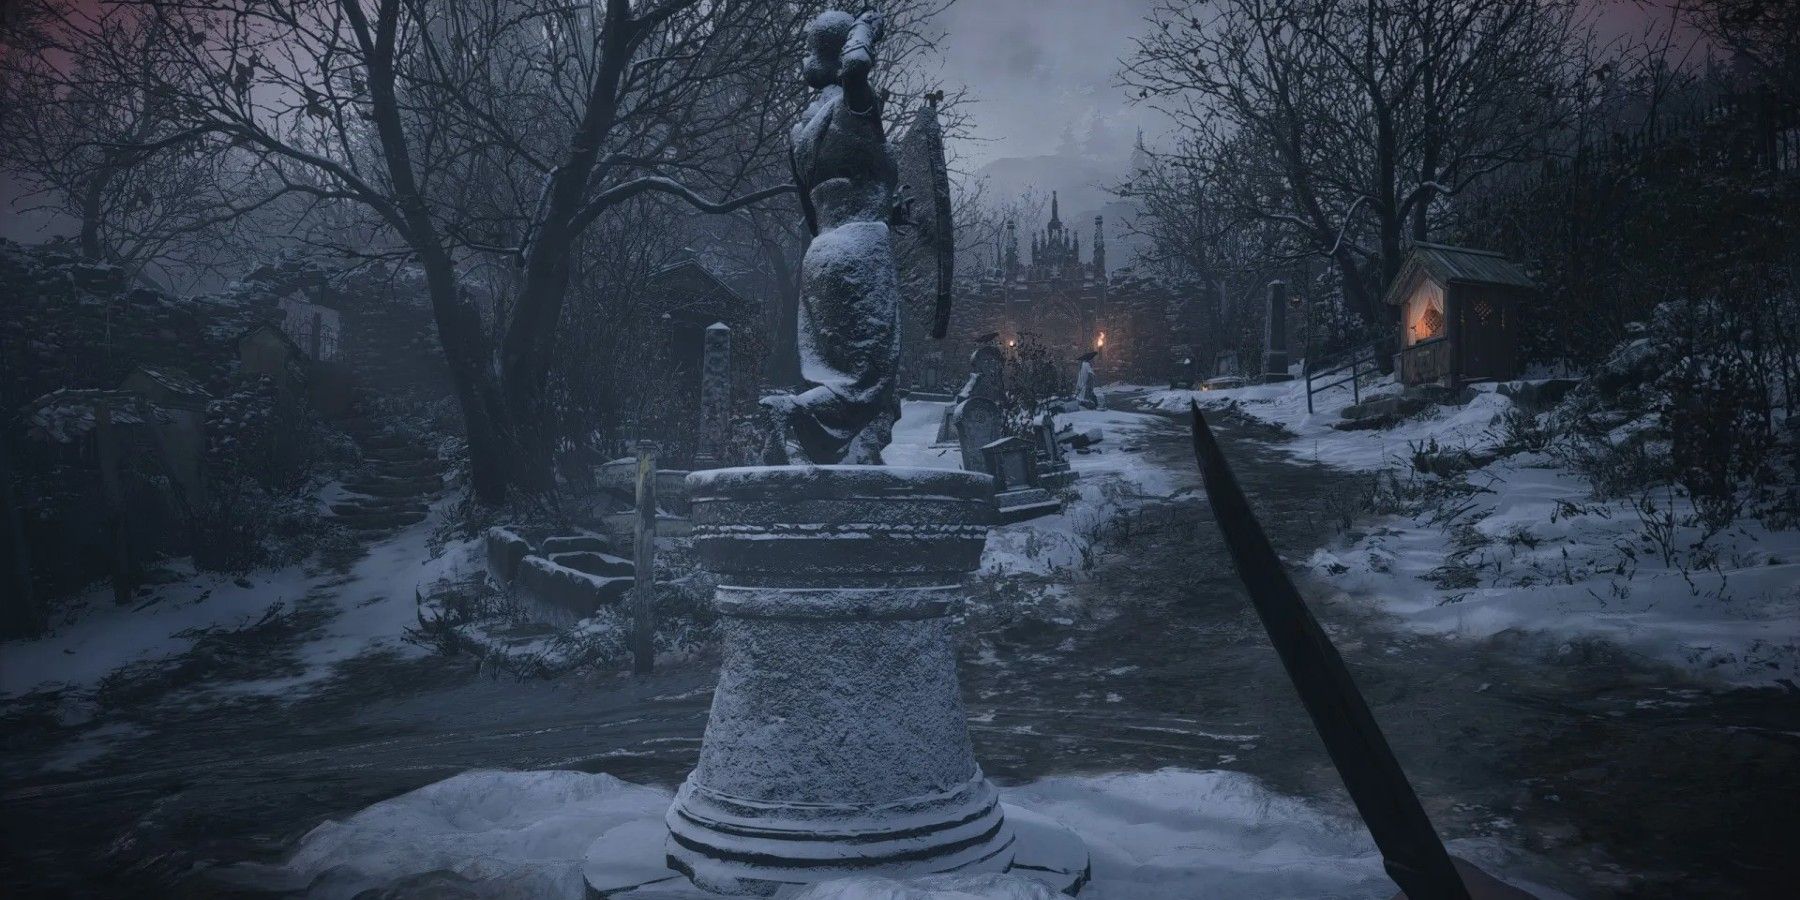 resident evil outdoors statue in a snowy park